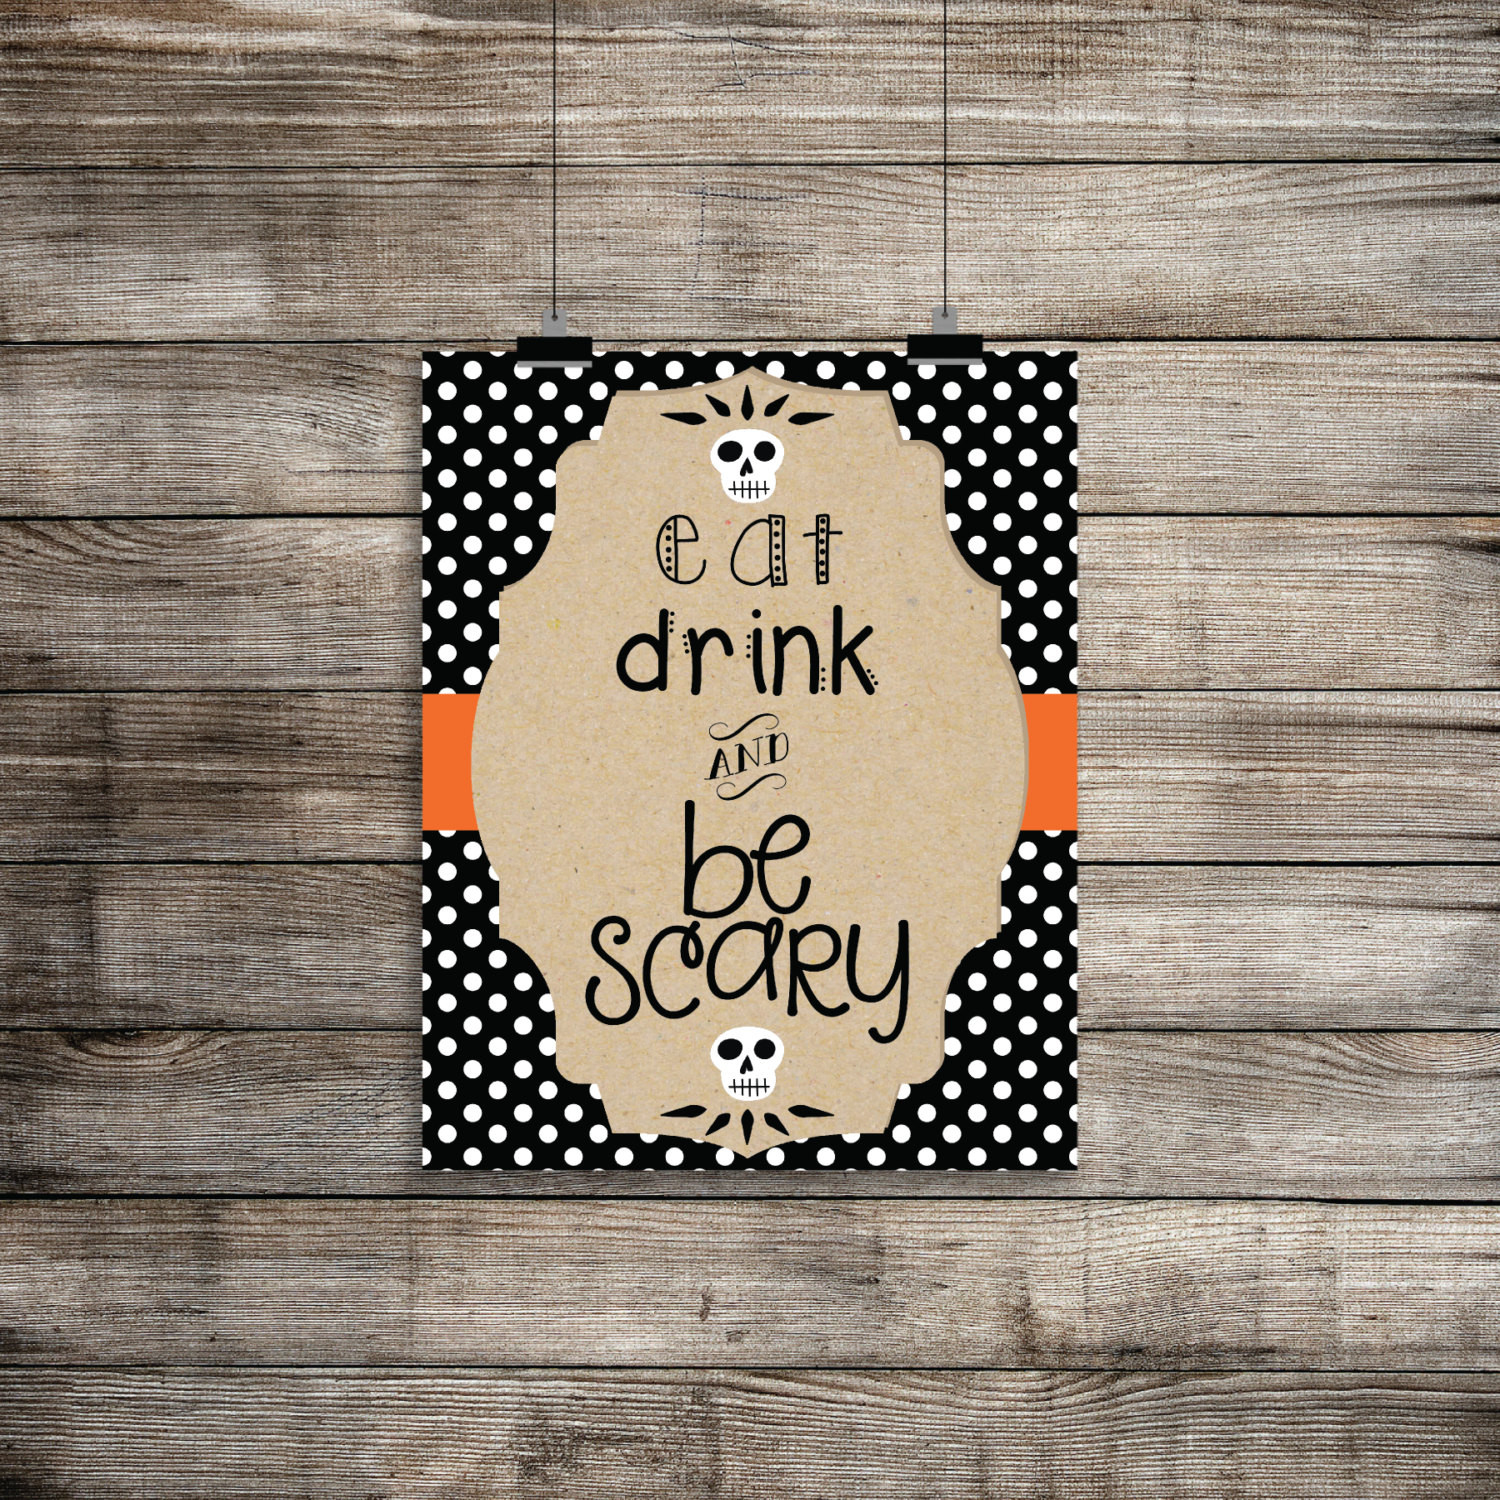 Halloween Wall Decor
 Eat Drink and Be Scary Halloween Print Halloween Wall Decor